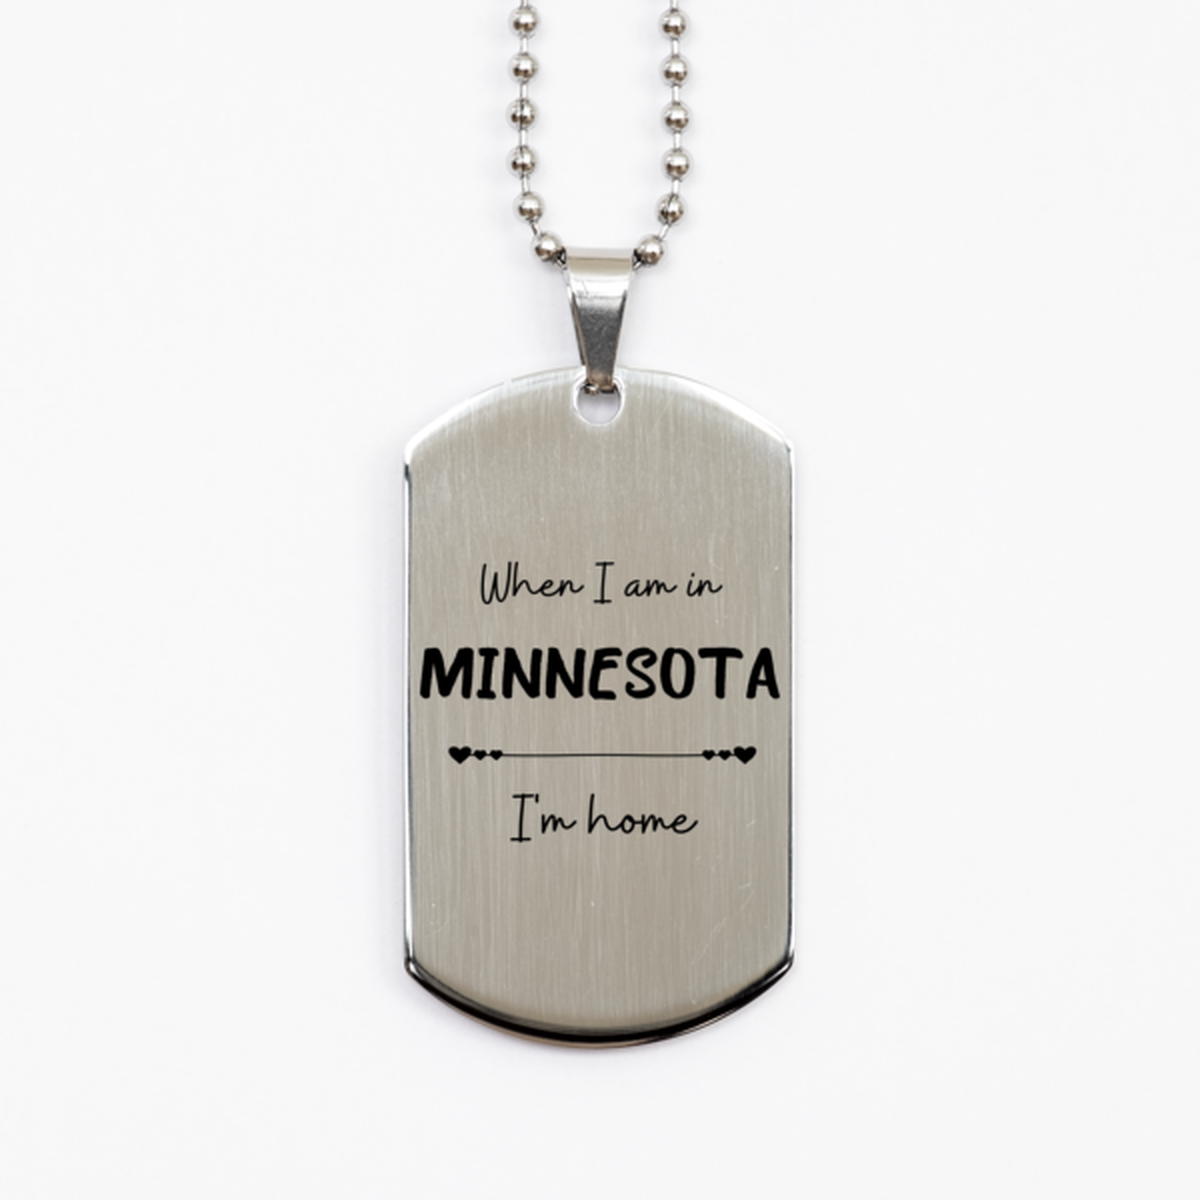 When I am in Minnesota I'm home Silver Dog Tag, Cheap Gifts For Minnesota, State Minnesota Birthday Gifts for Friends Coworker